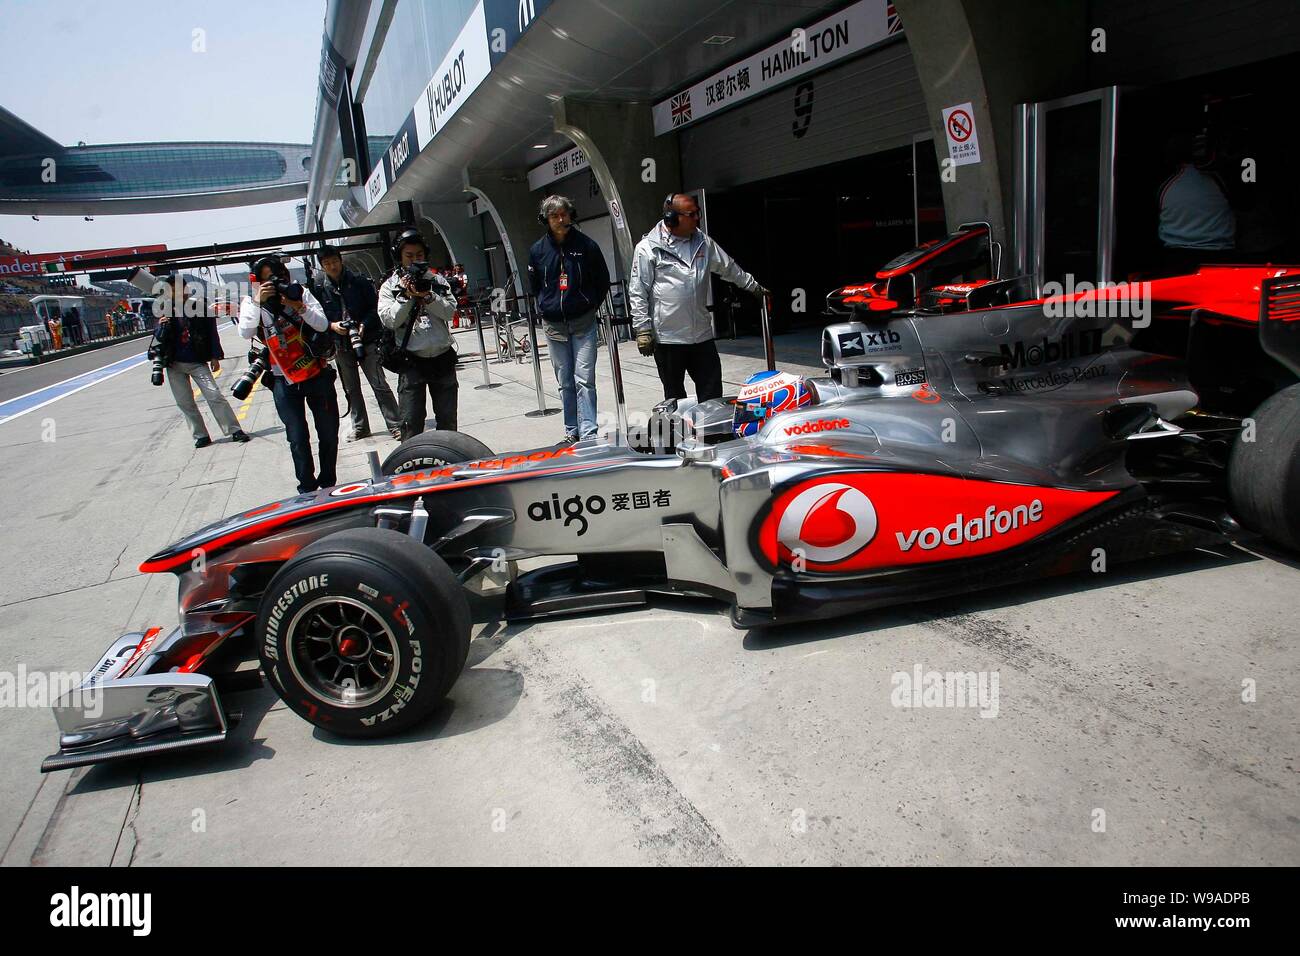 British F1 driver Jenson Button of McLaren Mercedes team is seen in his race car during the free practice session at the Shanghai International Circui Stock Photo